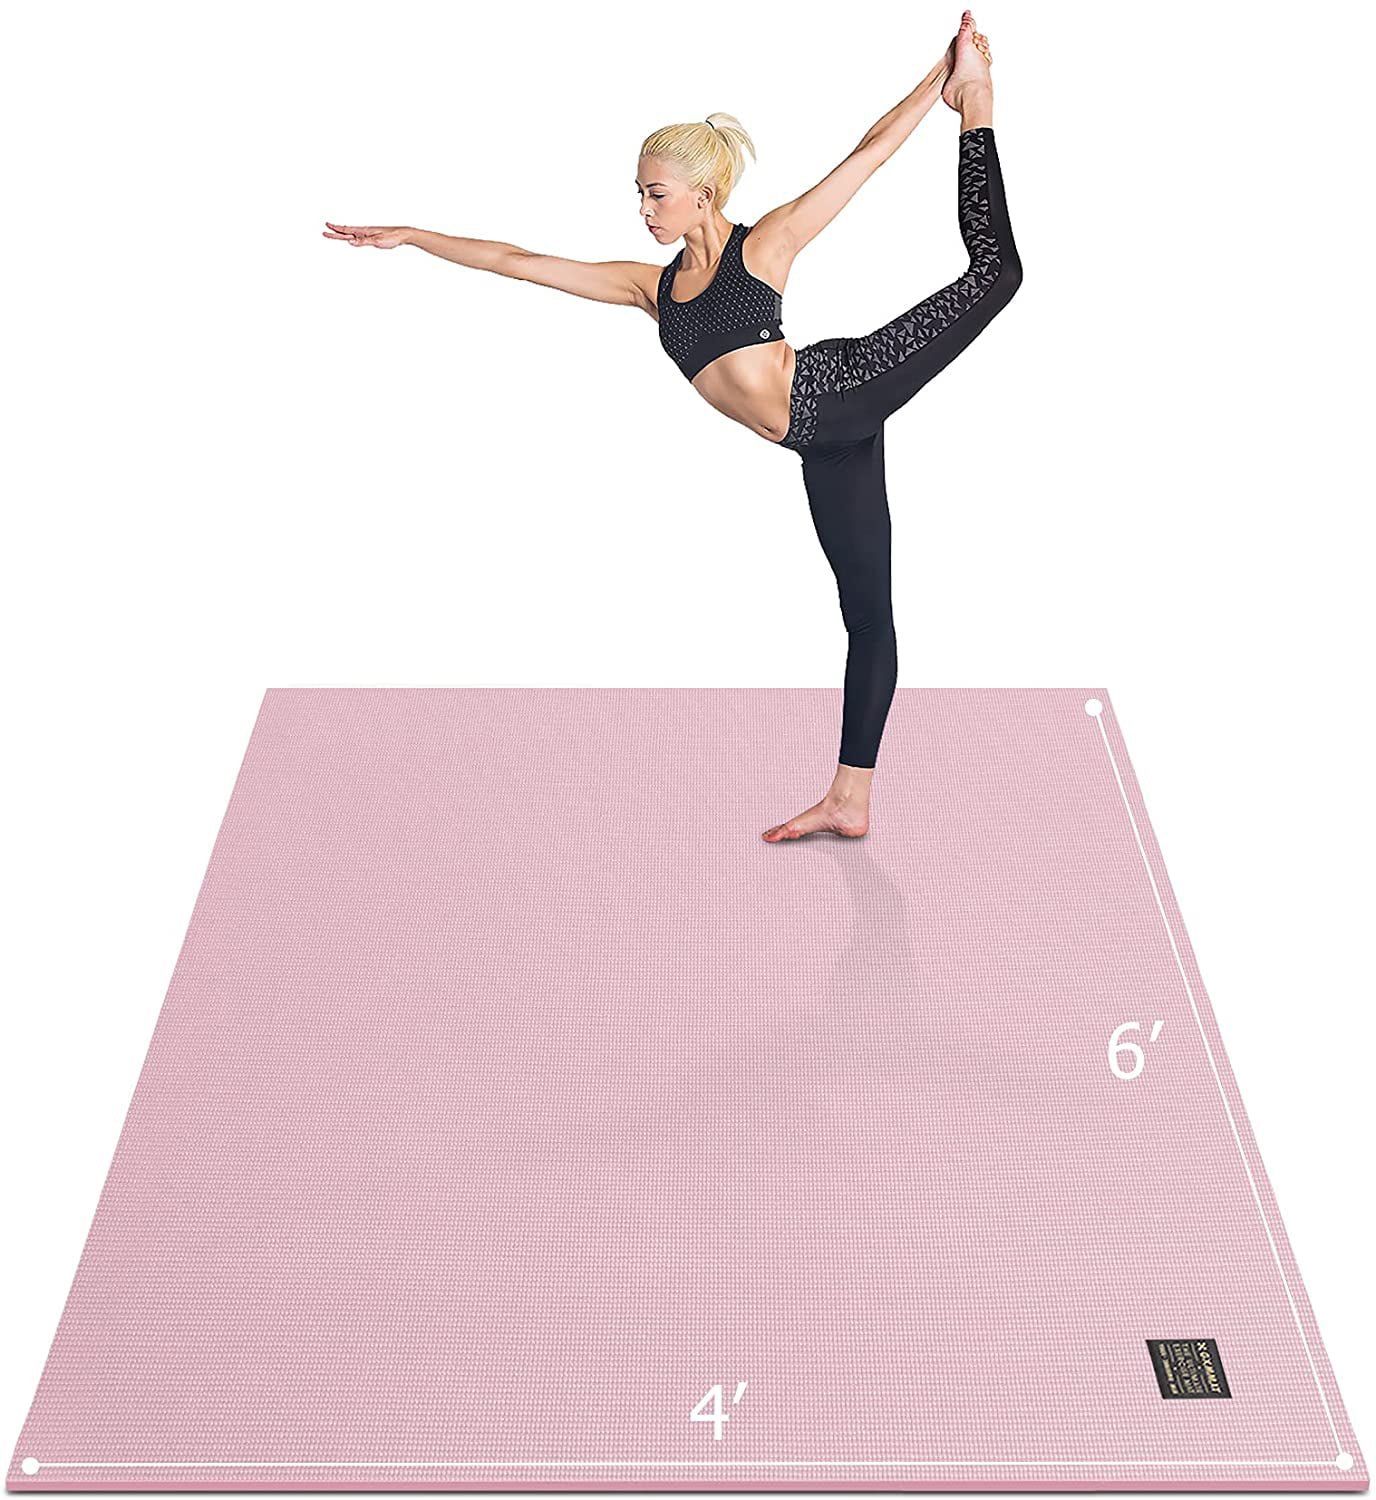 Non-slip Padded Exercise Mat Extra Thick Fitness Yoga Pilates Gym Workout 